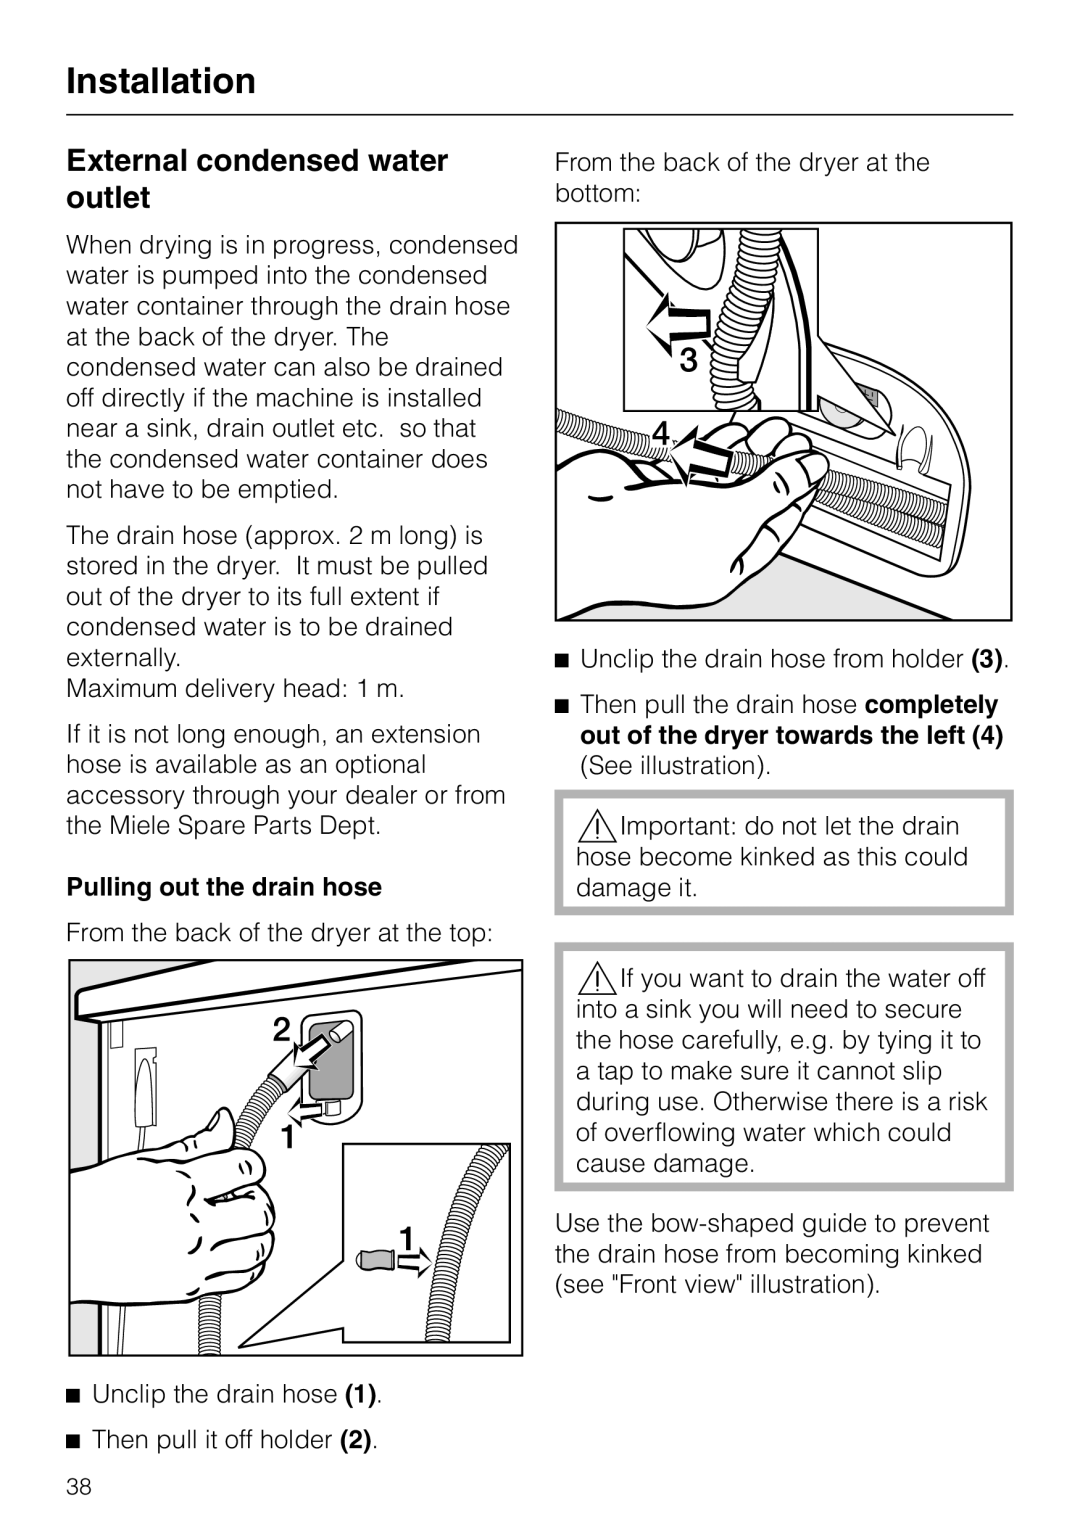 Miele T 4422 C operating instructions External condensed water outlet, Pulling out the drain hose 